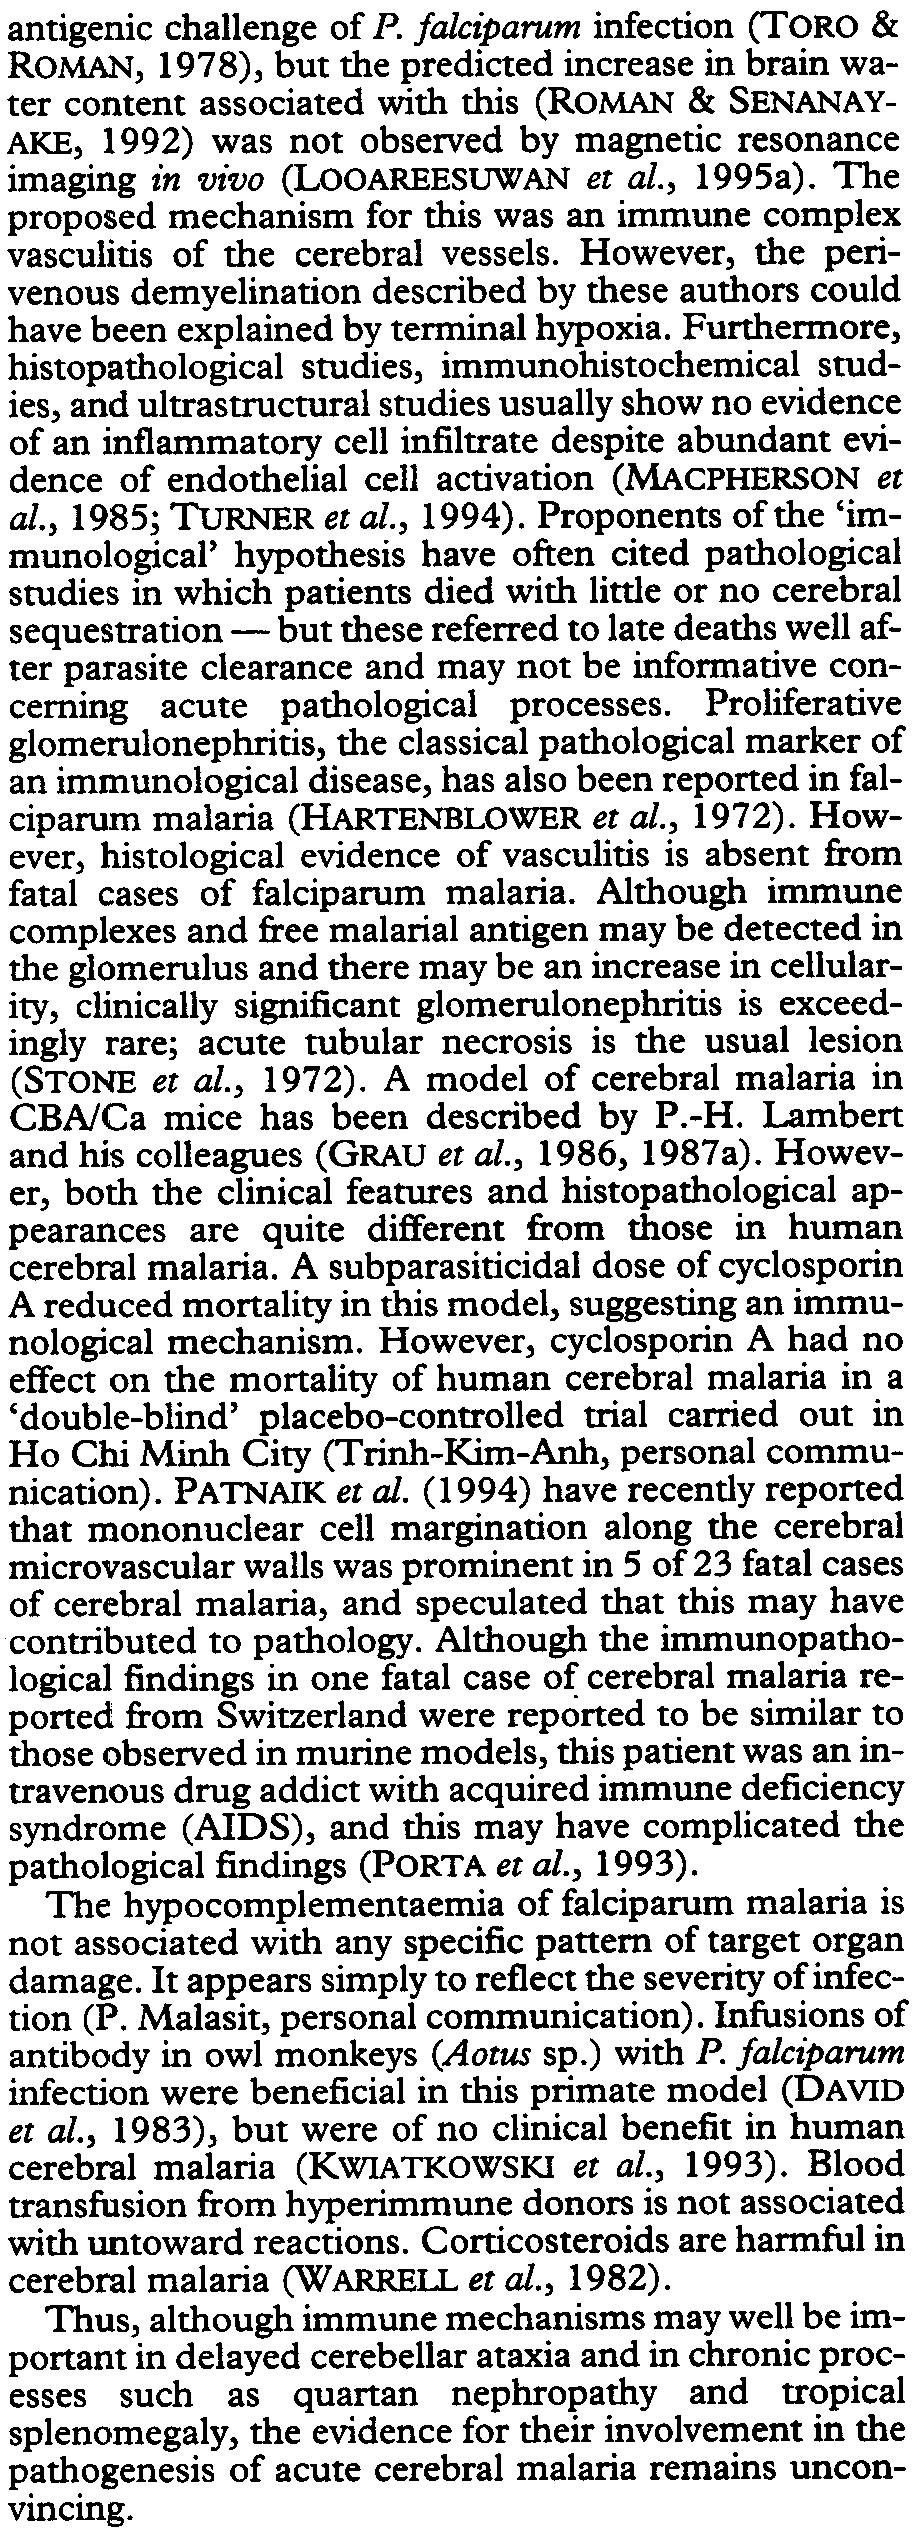 TRANACTIONS OFlliE ROYAL SOCIETY OF TROPICAL MEDICINE AND HYGIENE (2000) 94, SUPPLEMENT 1 81/23 expressed on placental vascular endothelium.